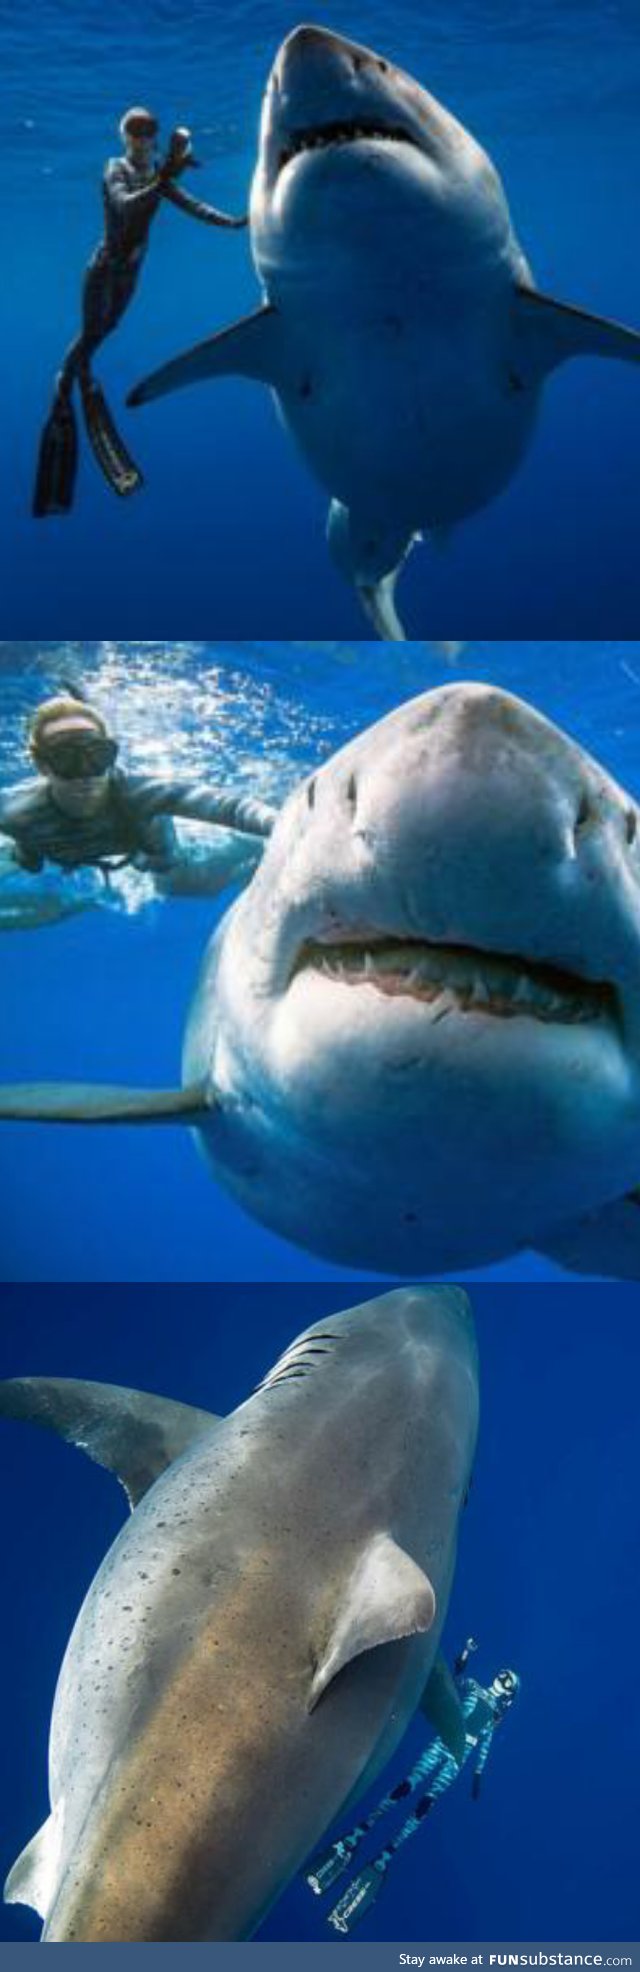 Deep Blue, largest documented Great White. No way in HELL I would get in that water.